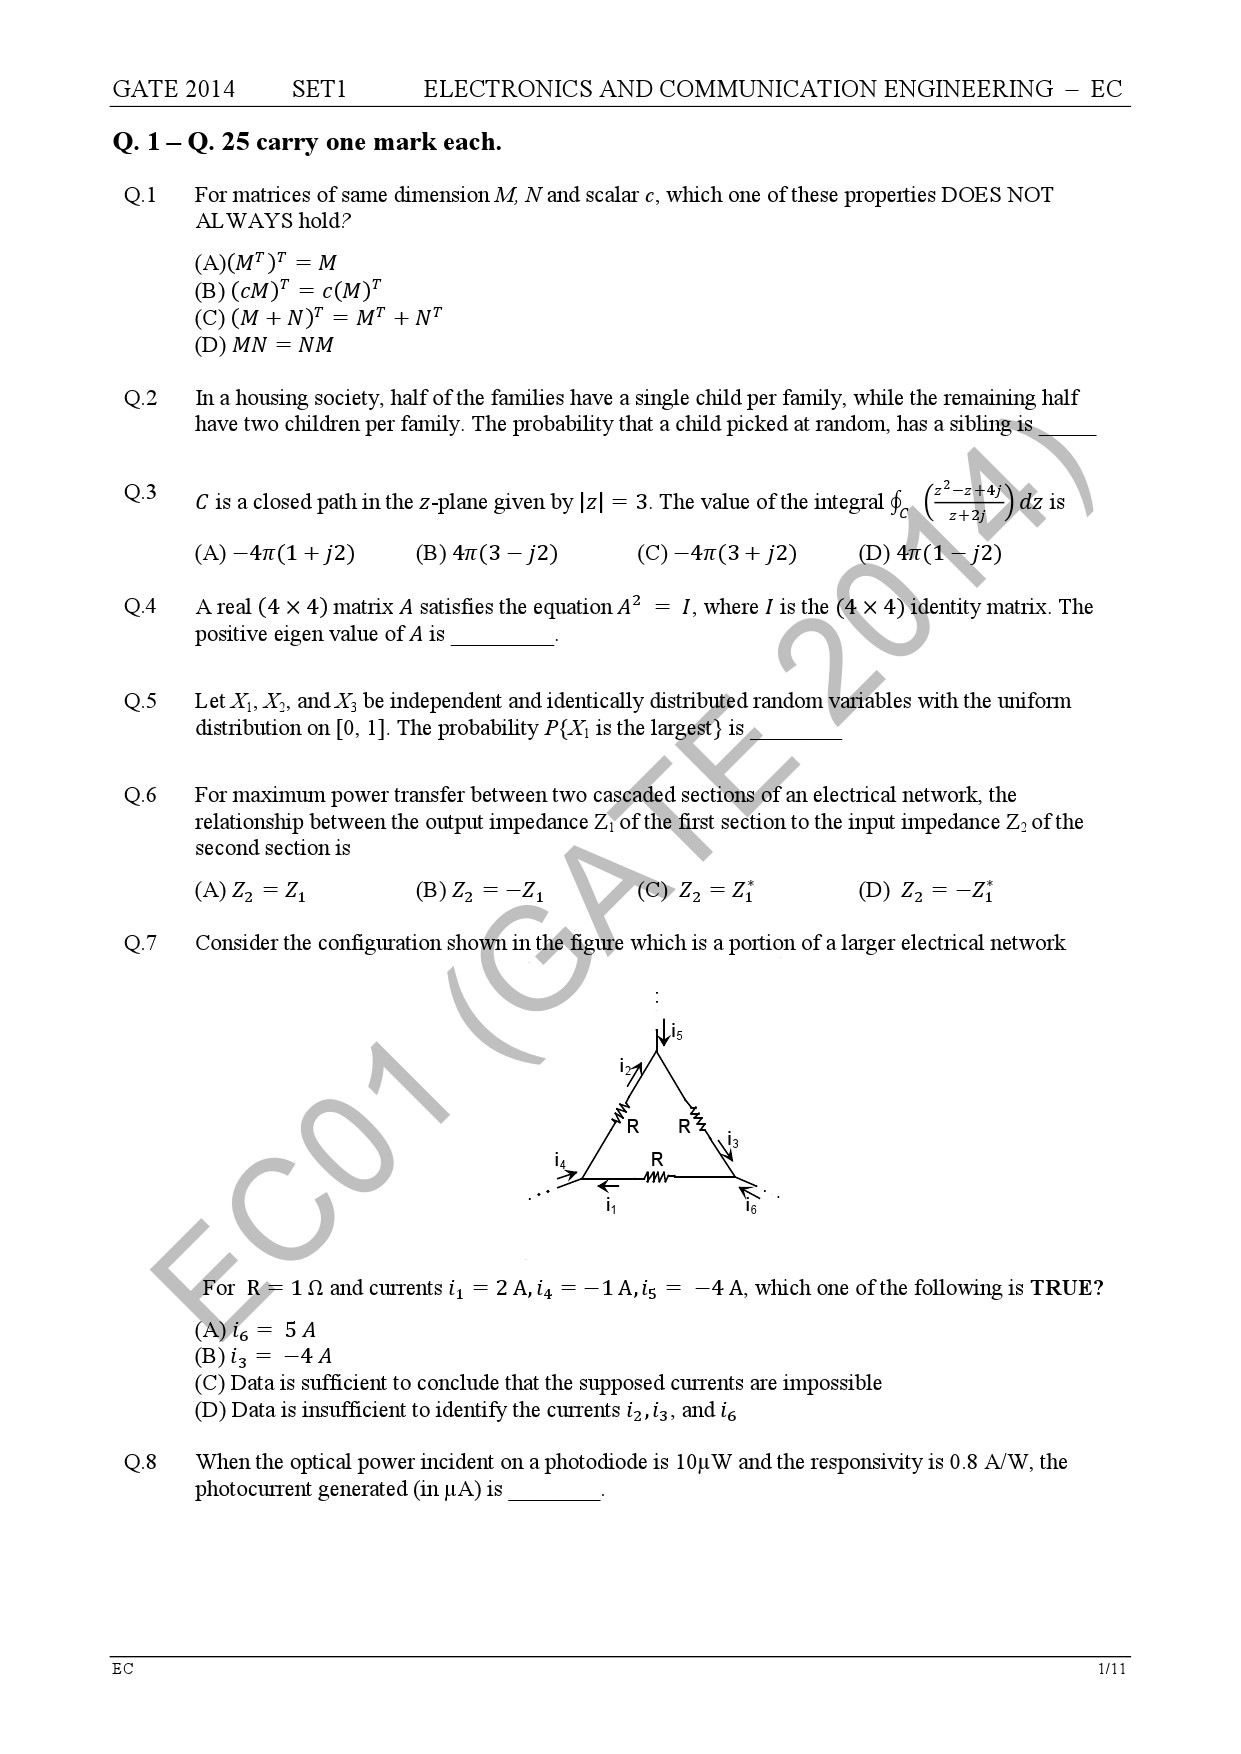 GATE Exam Question Paper 2014 Electronics and Communication Engineering Set 1 7